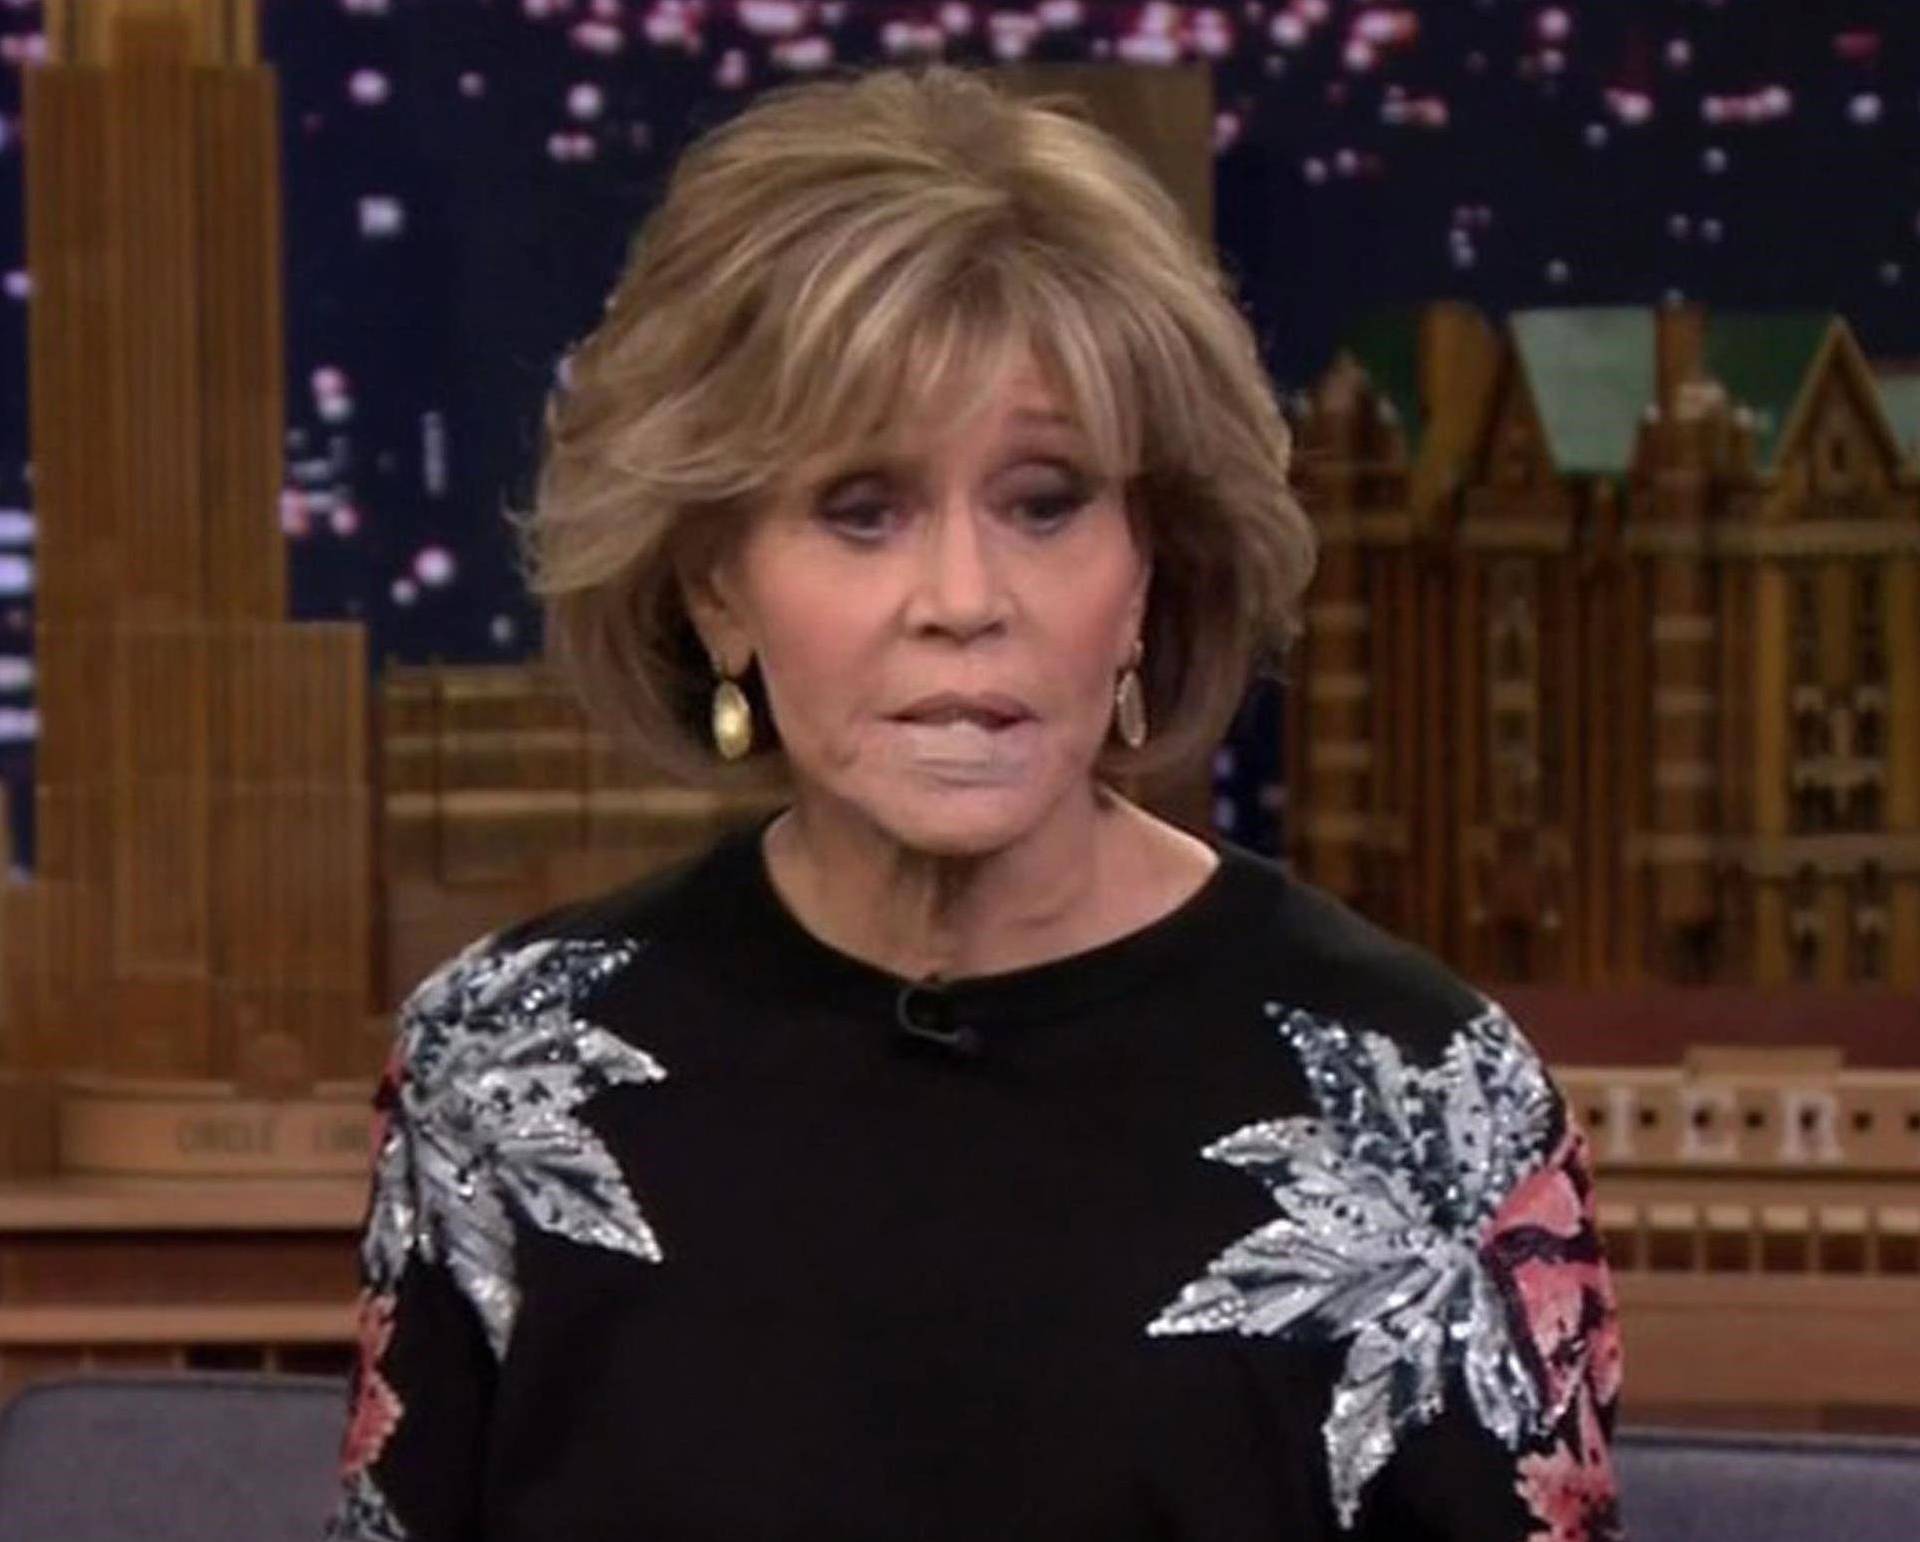 Jane Fonda wears bandage on her face for Tonight Show interview as she reveals she had cancerous growth removed from her lower lip